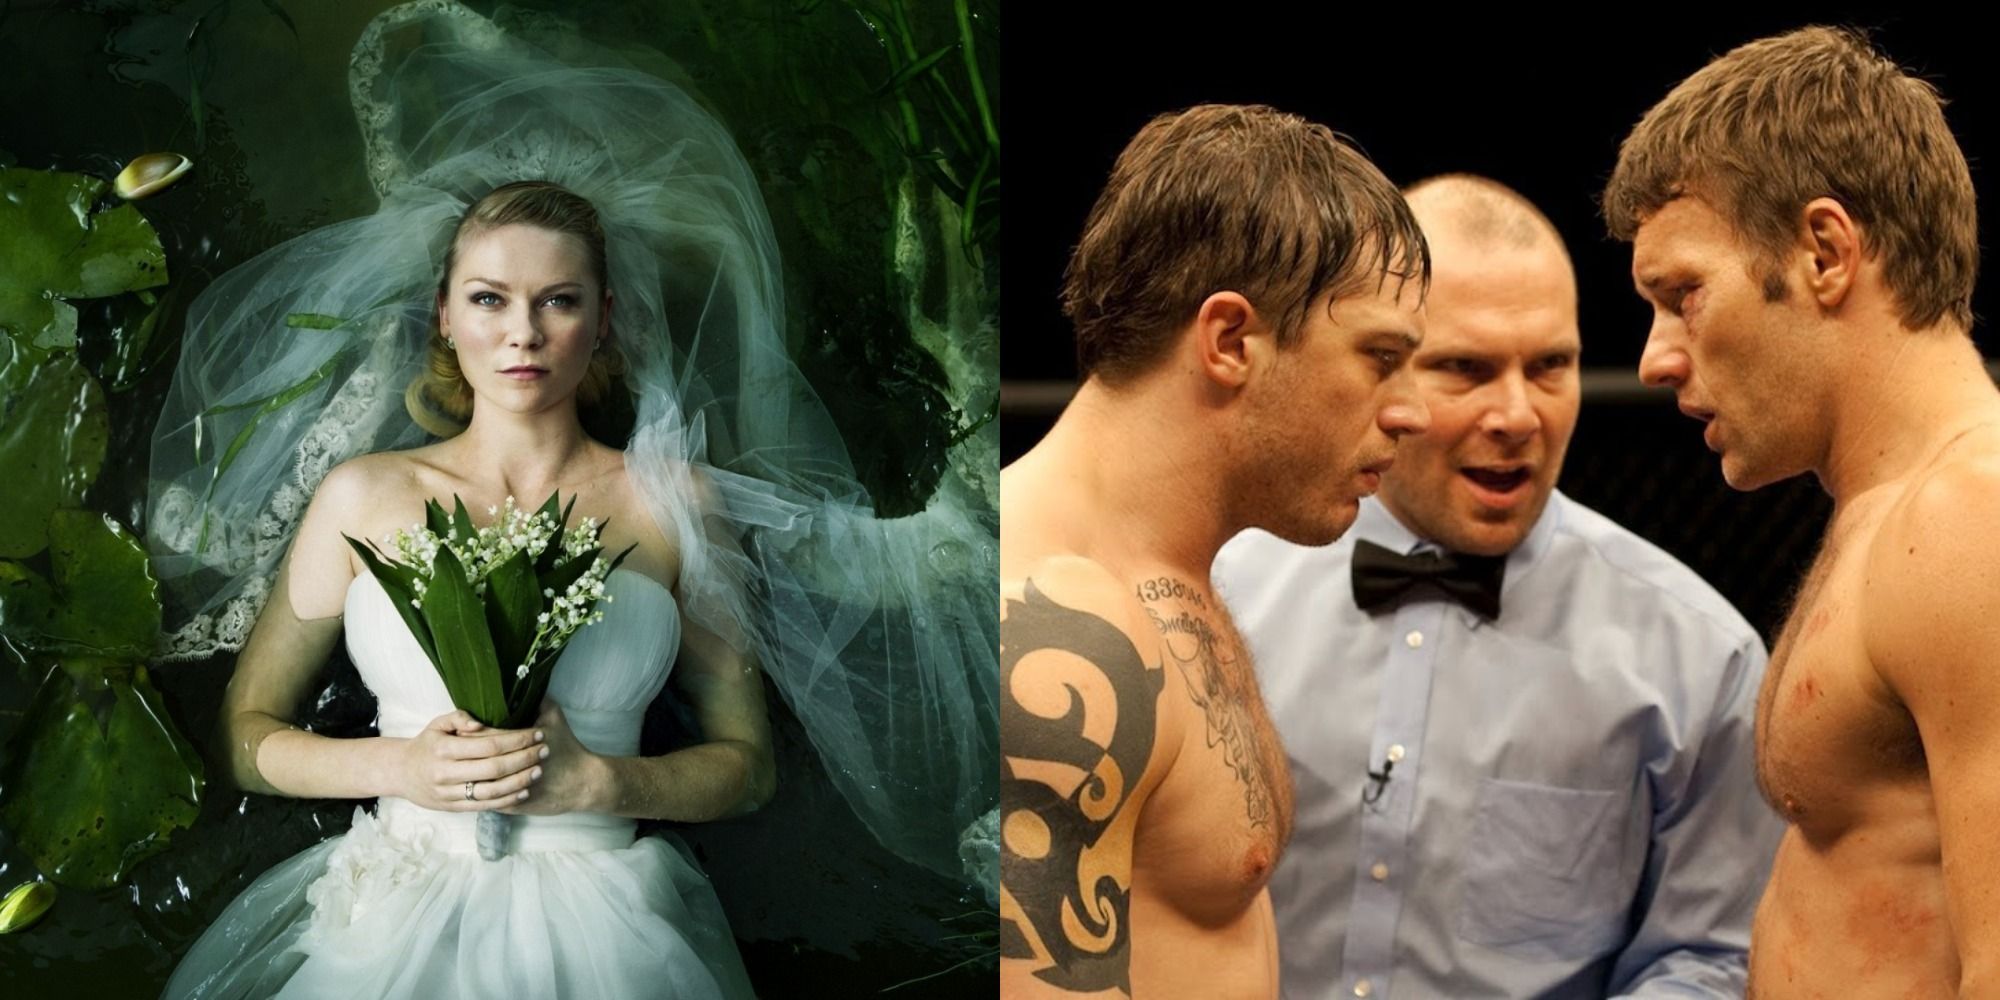 Split image depicting Justine from Melancholia in her wedding dress lying on water, and Tom and Brendan from Warrior facing off